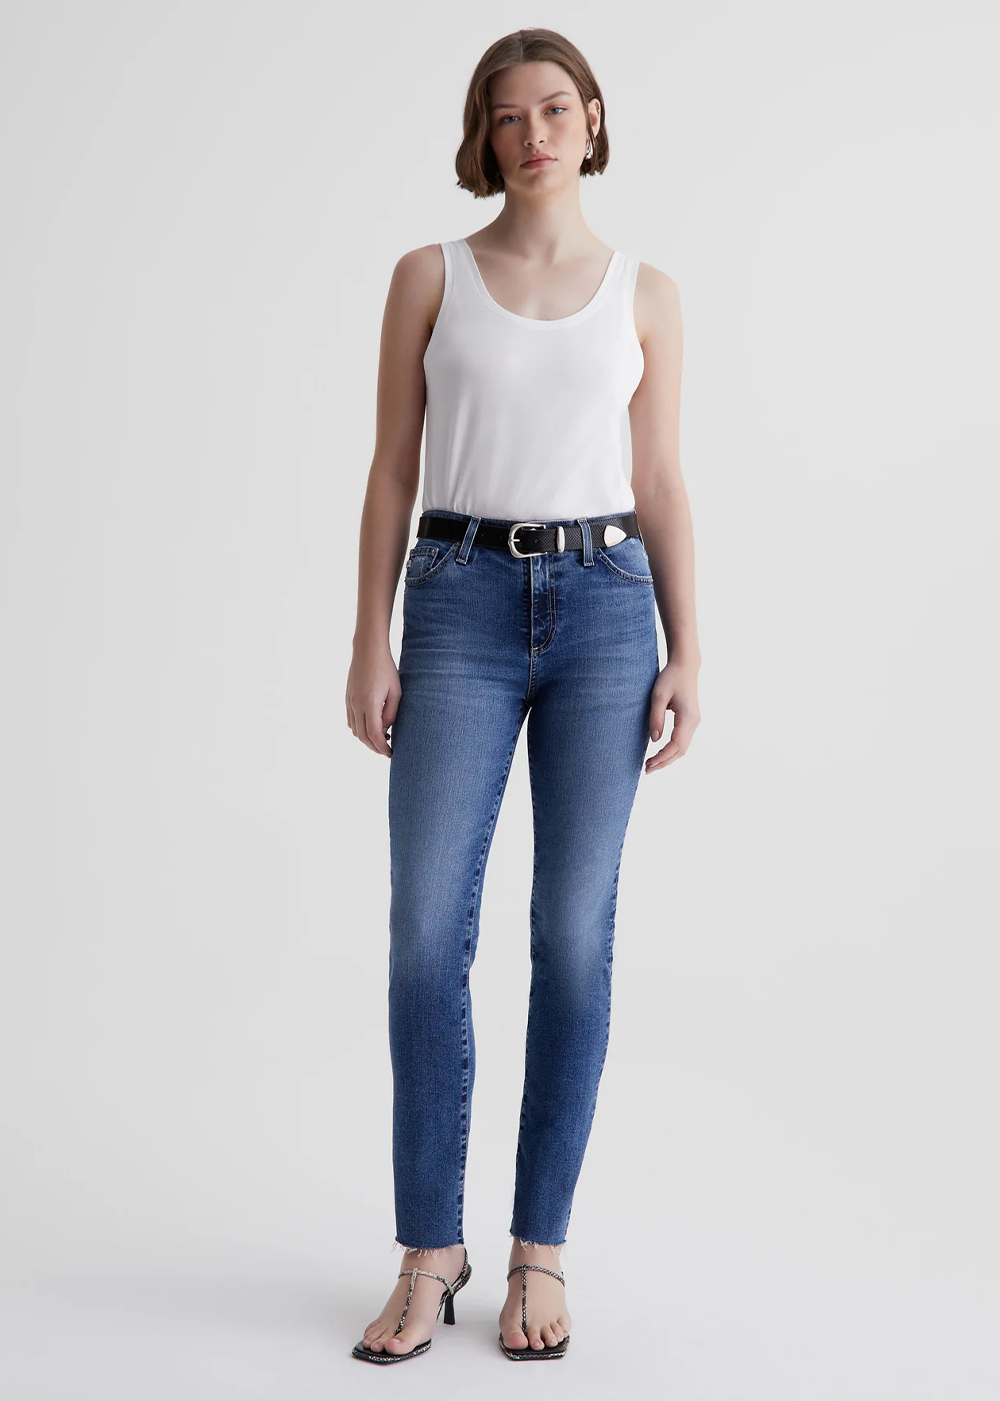 Zoomed out shot of model wearing the Mari High Rise Slim Straight Jean from AG Jeans.